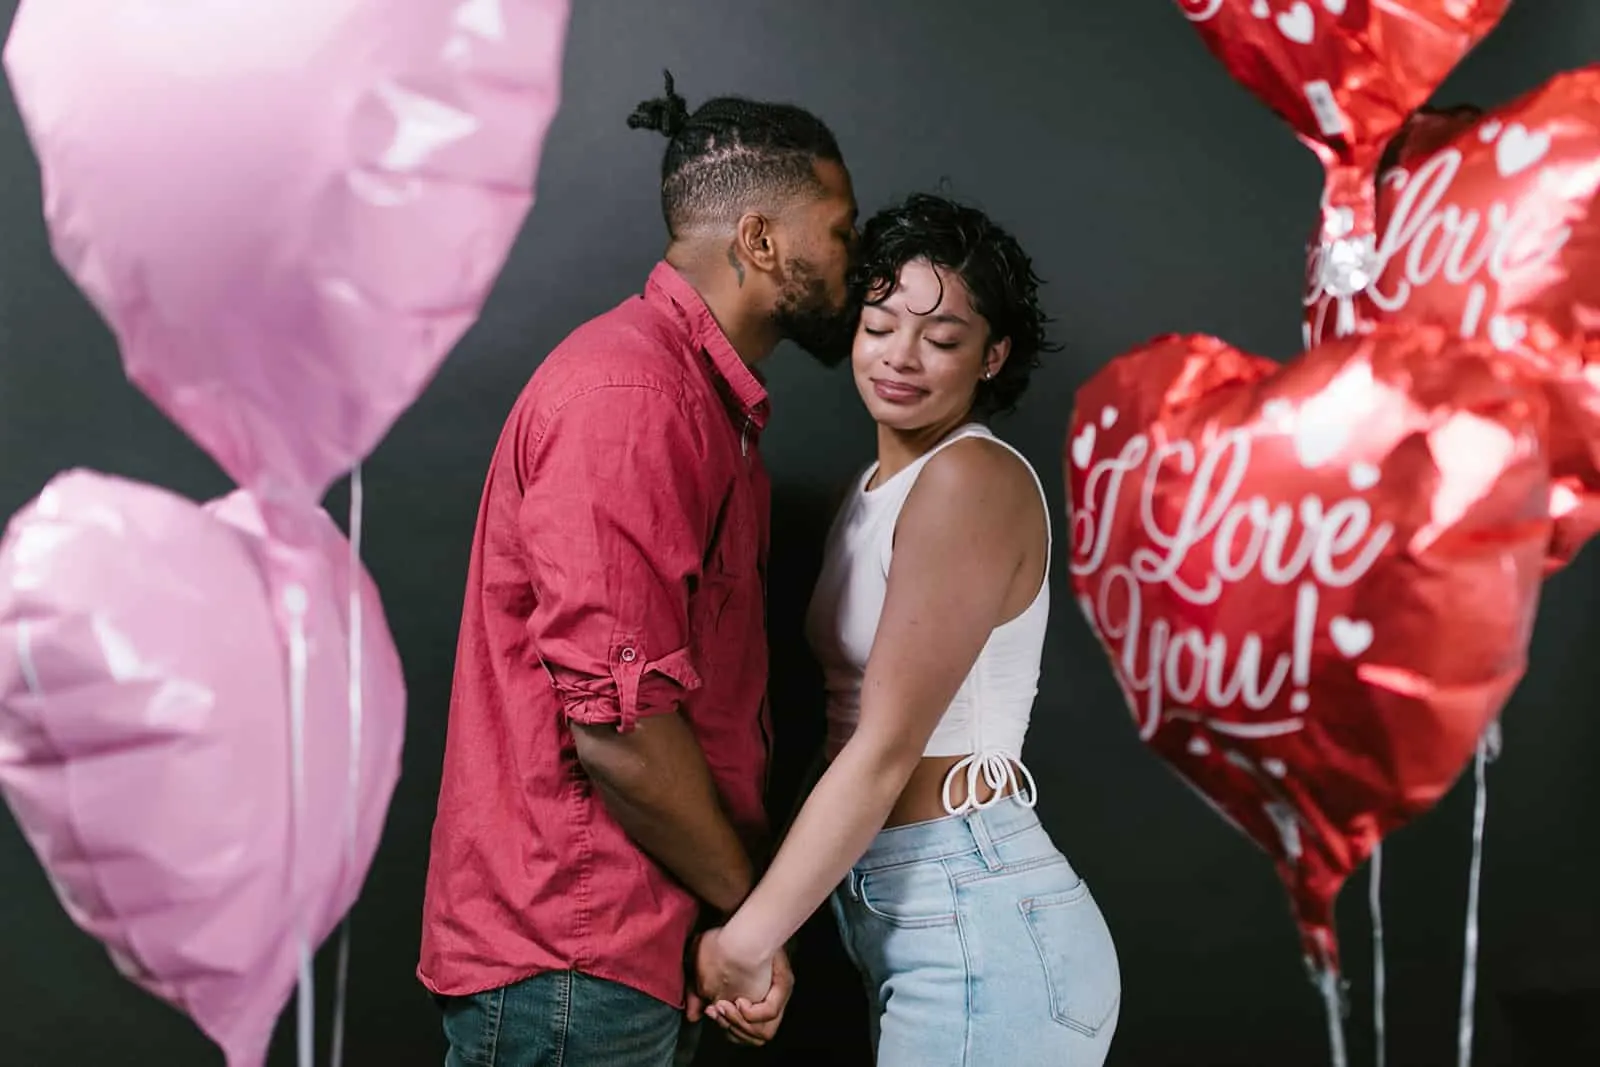 man kissing his girlfriend on a cheek while standing together between balloons